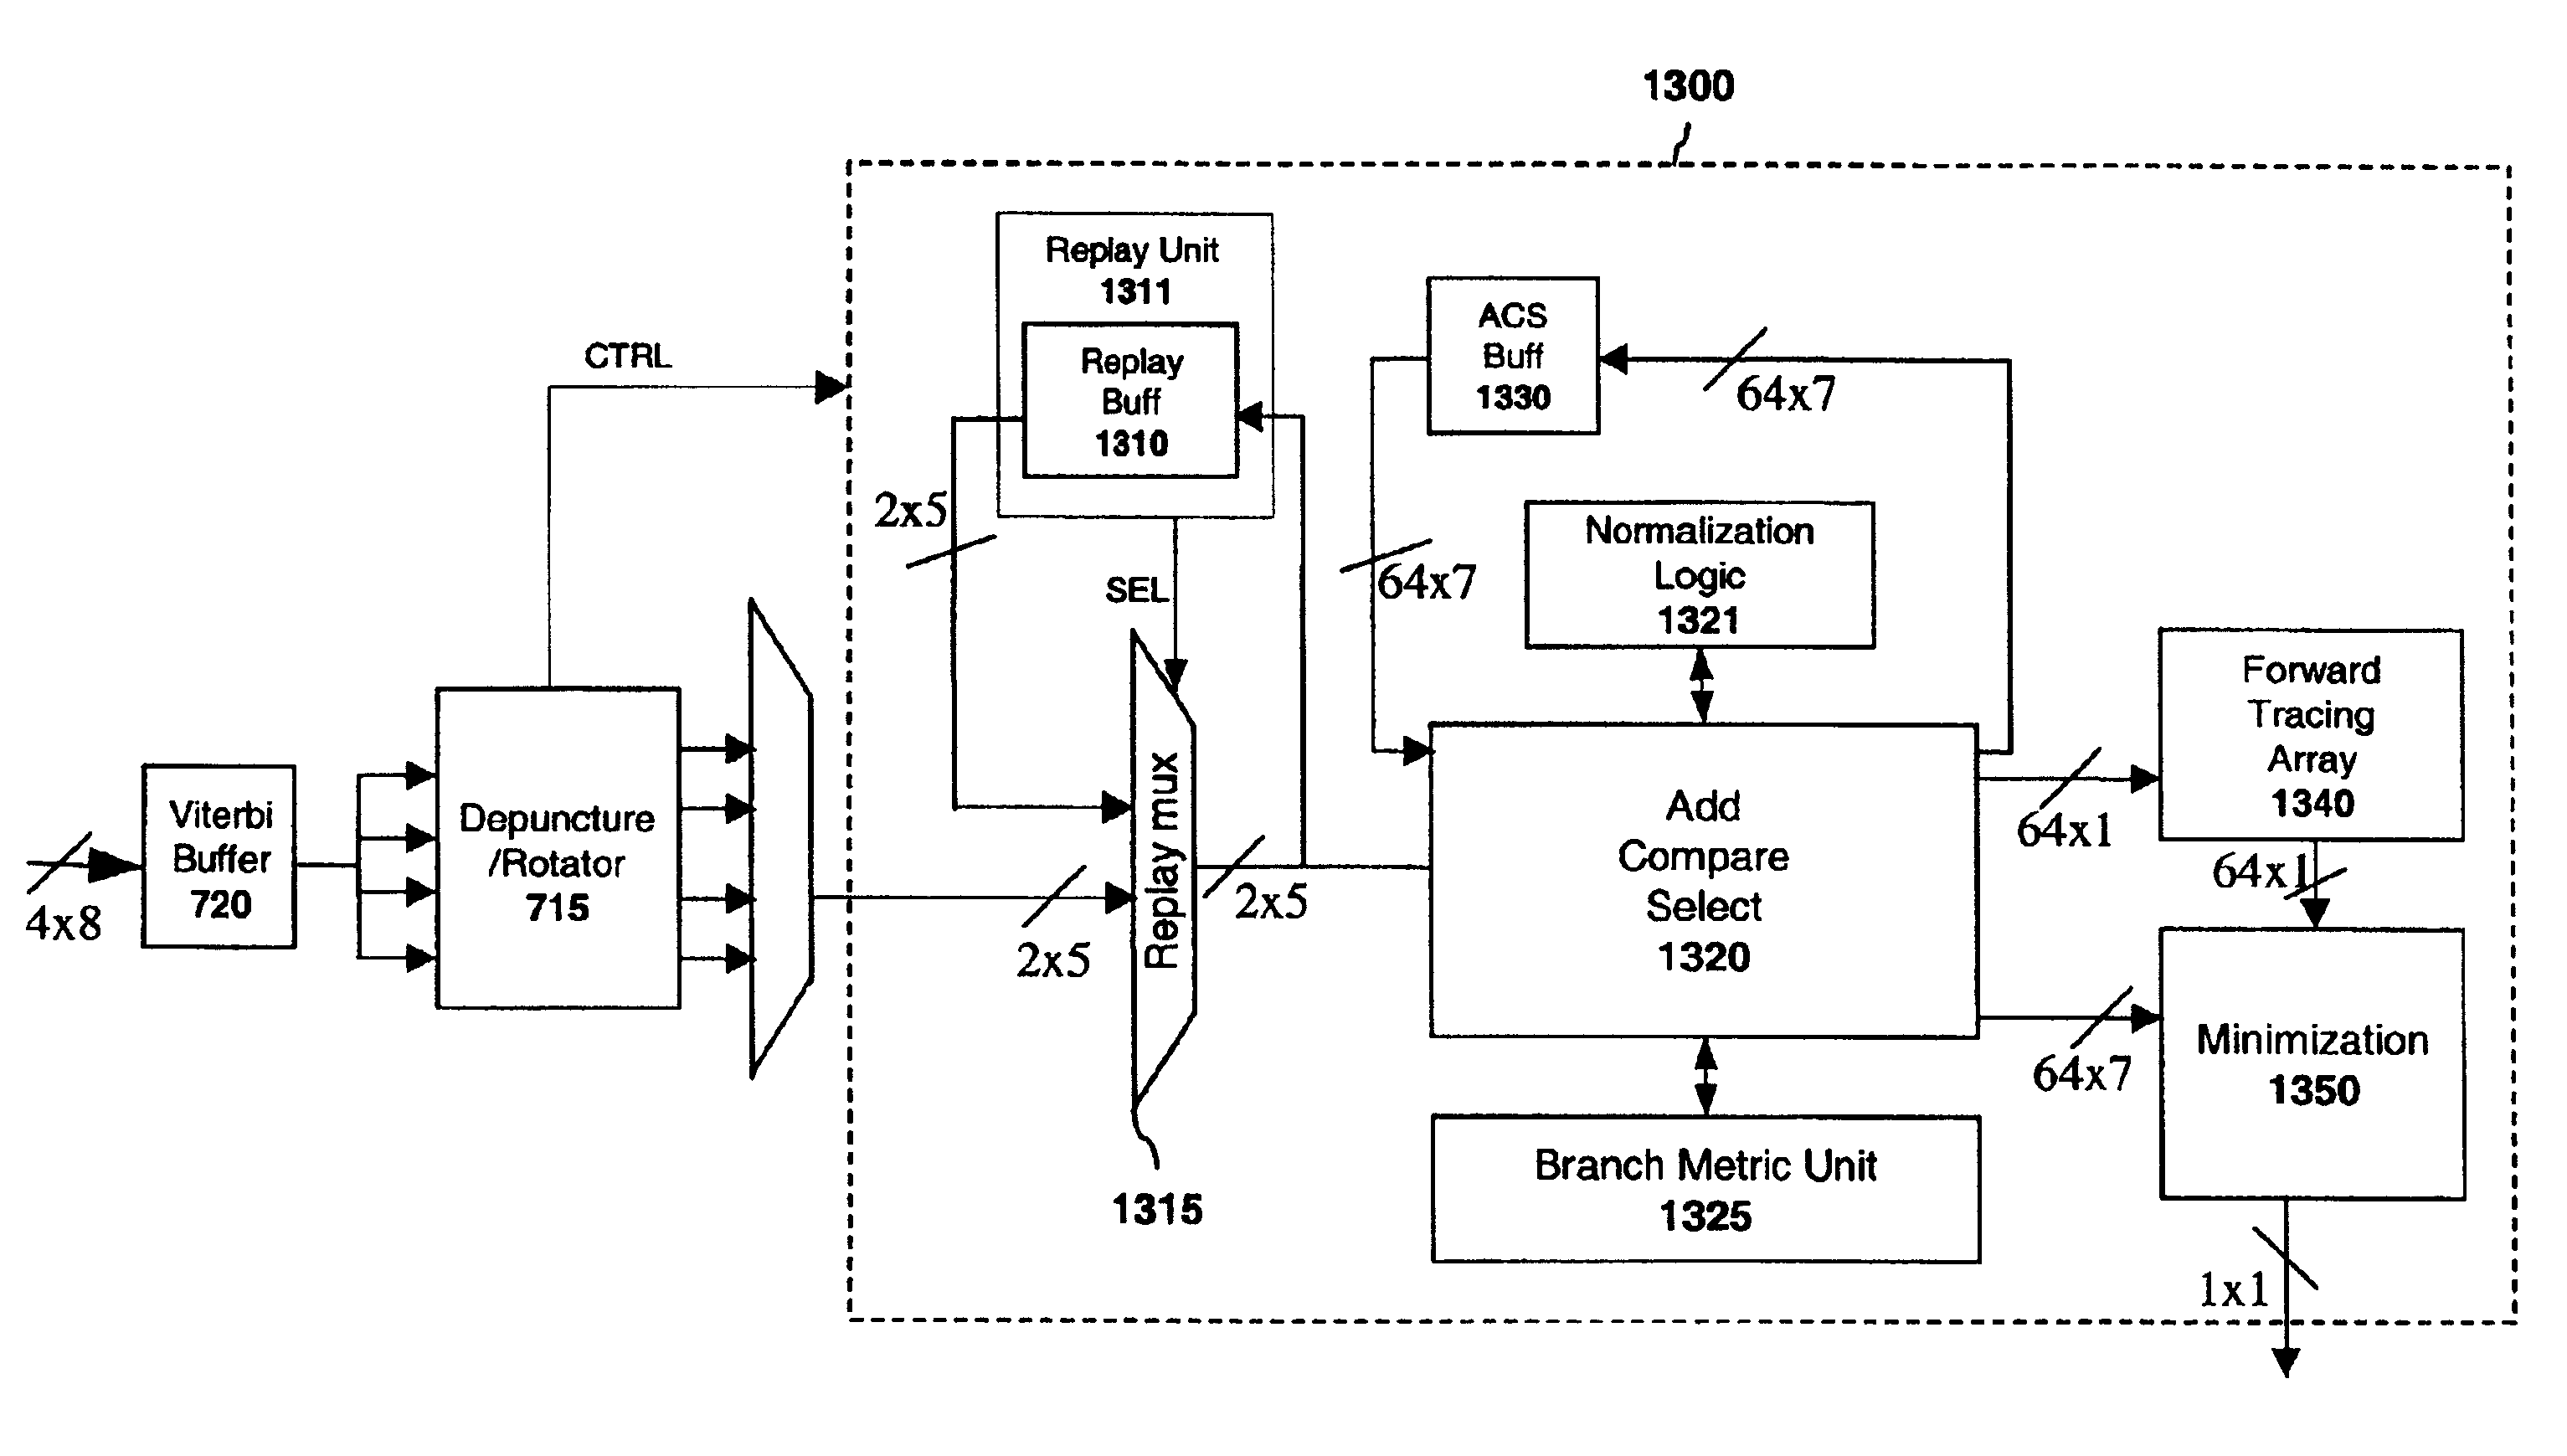 Apparatus and method for saturating decoder values